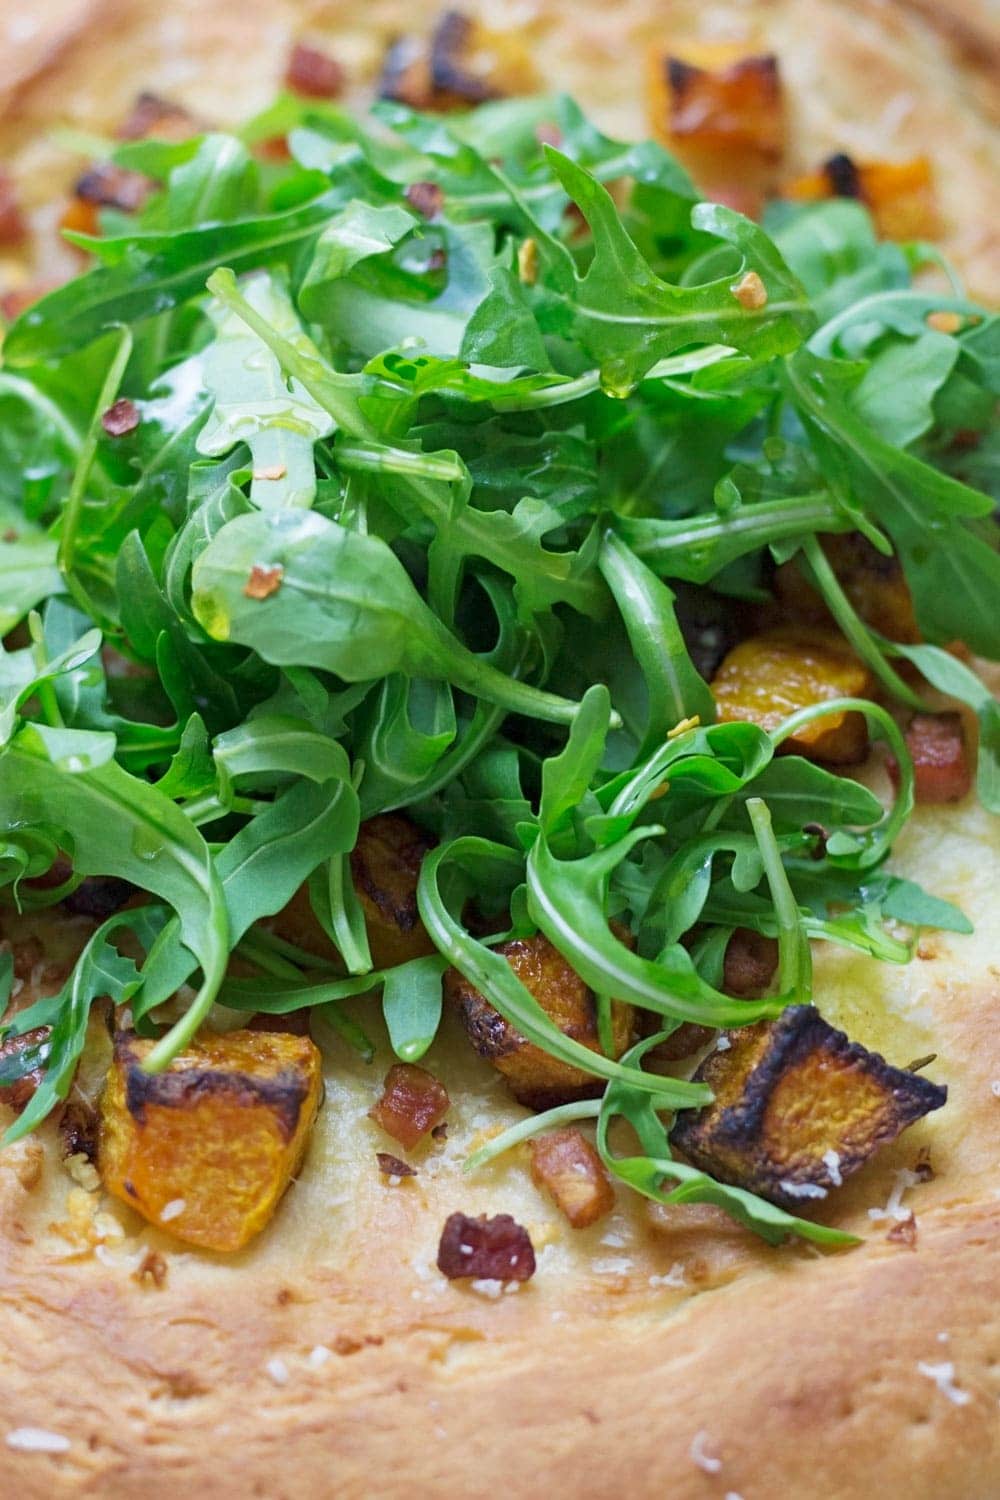 Roasted butternut squash & pancetta pizza is a tasty change from traditional pizza. The toppings are the perfect combination of sweet and salty!